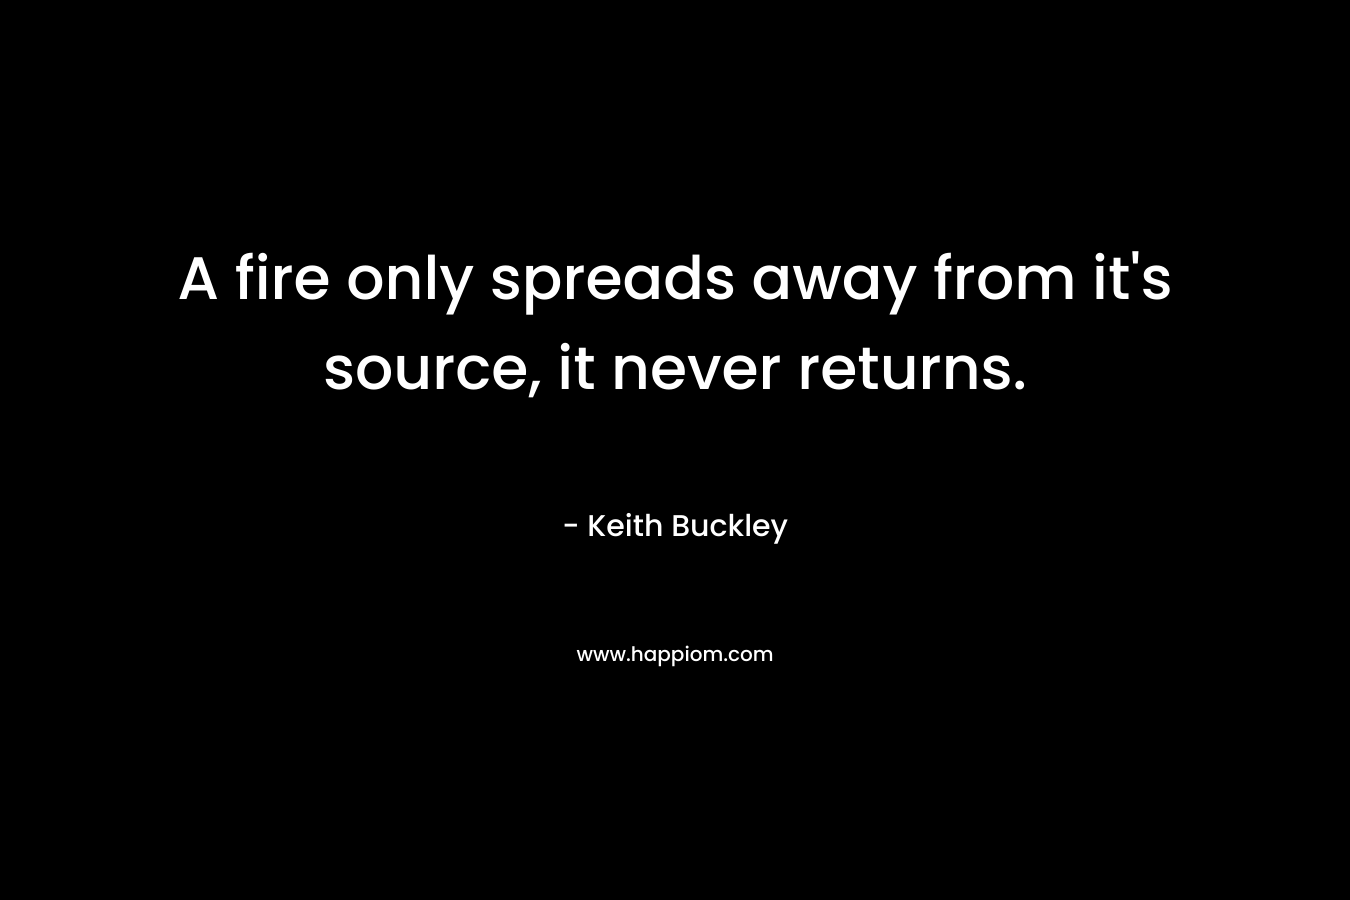 A fire only spreads away from it’s source, it never returns. – Keith Buckley